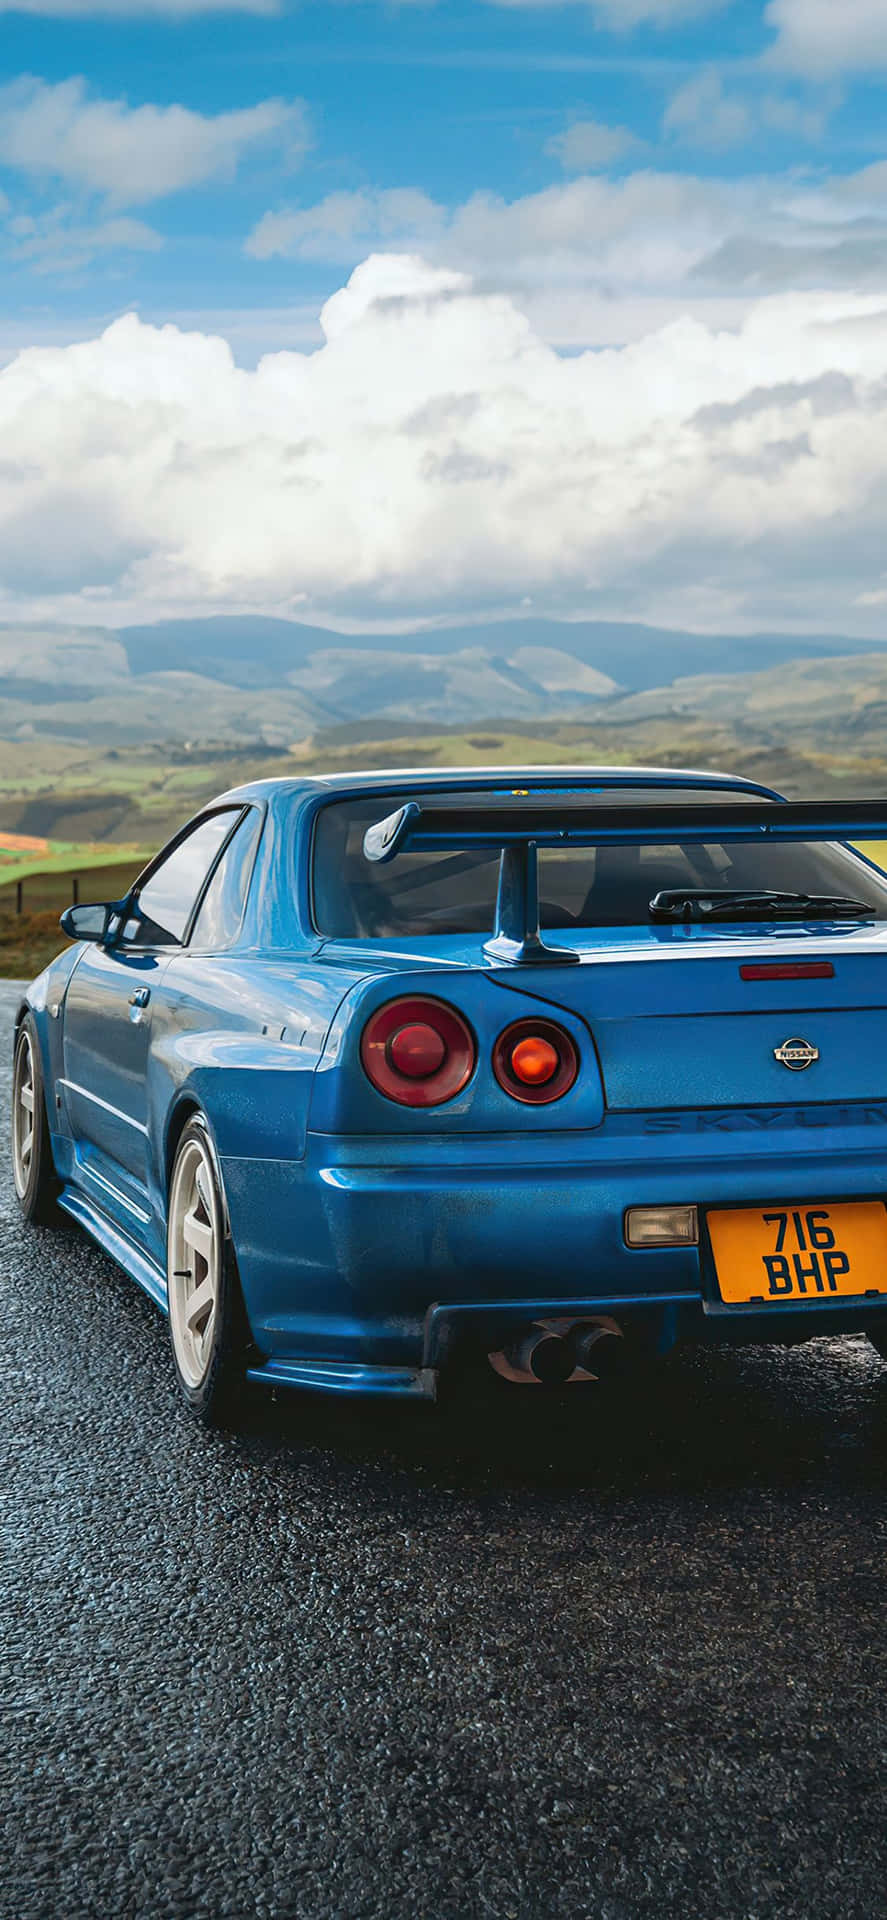 Experience the Nissan Skyline with the iPhone Wallpaper